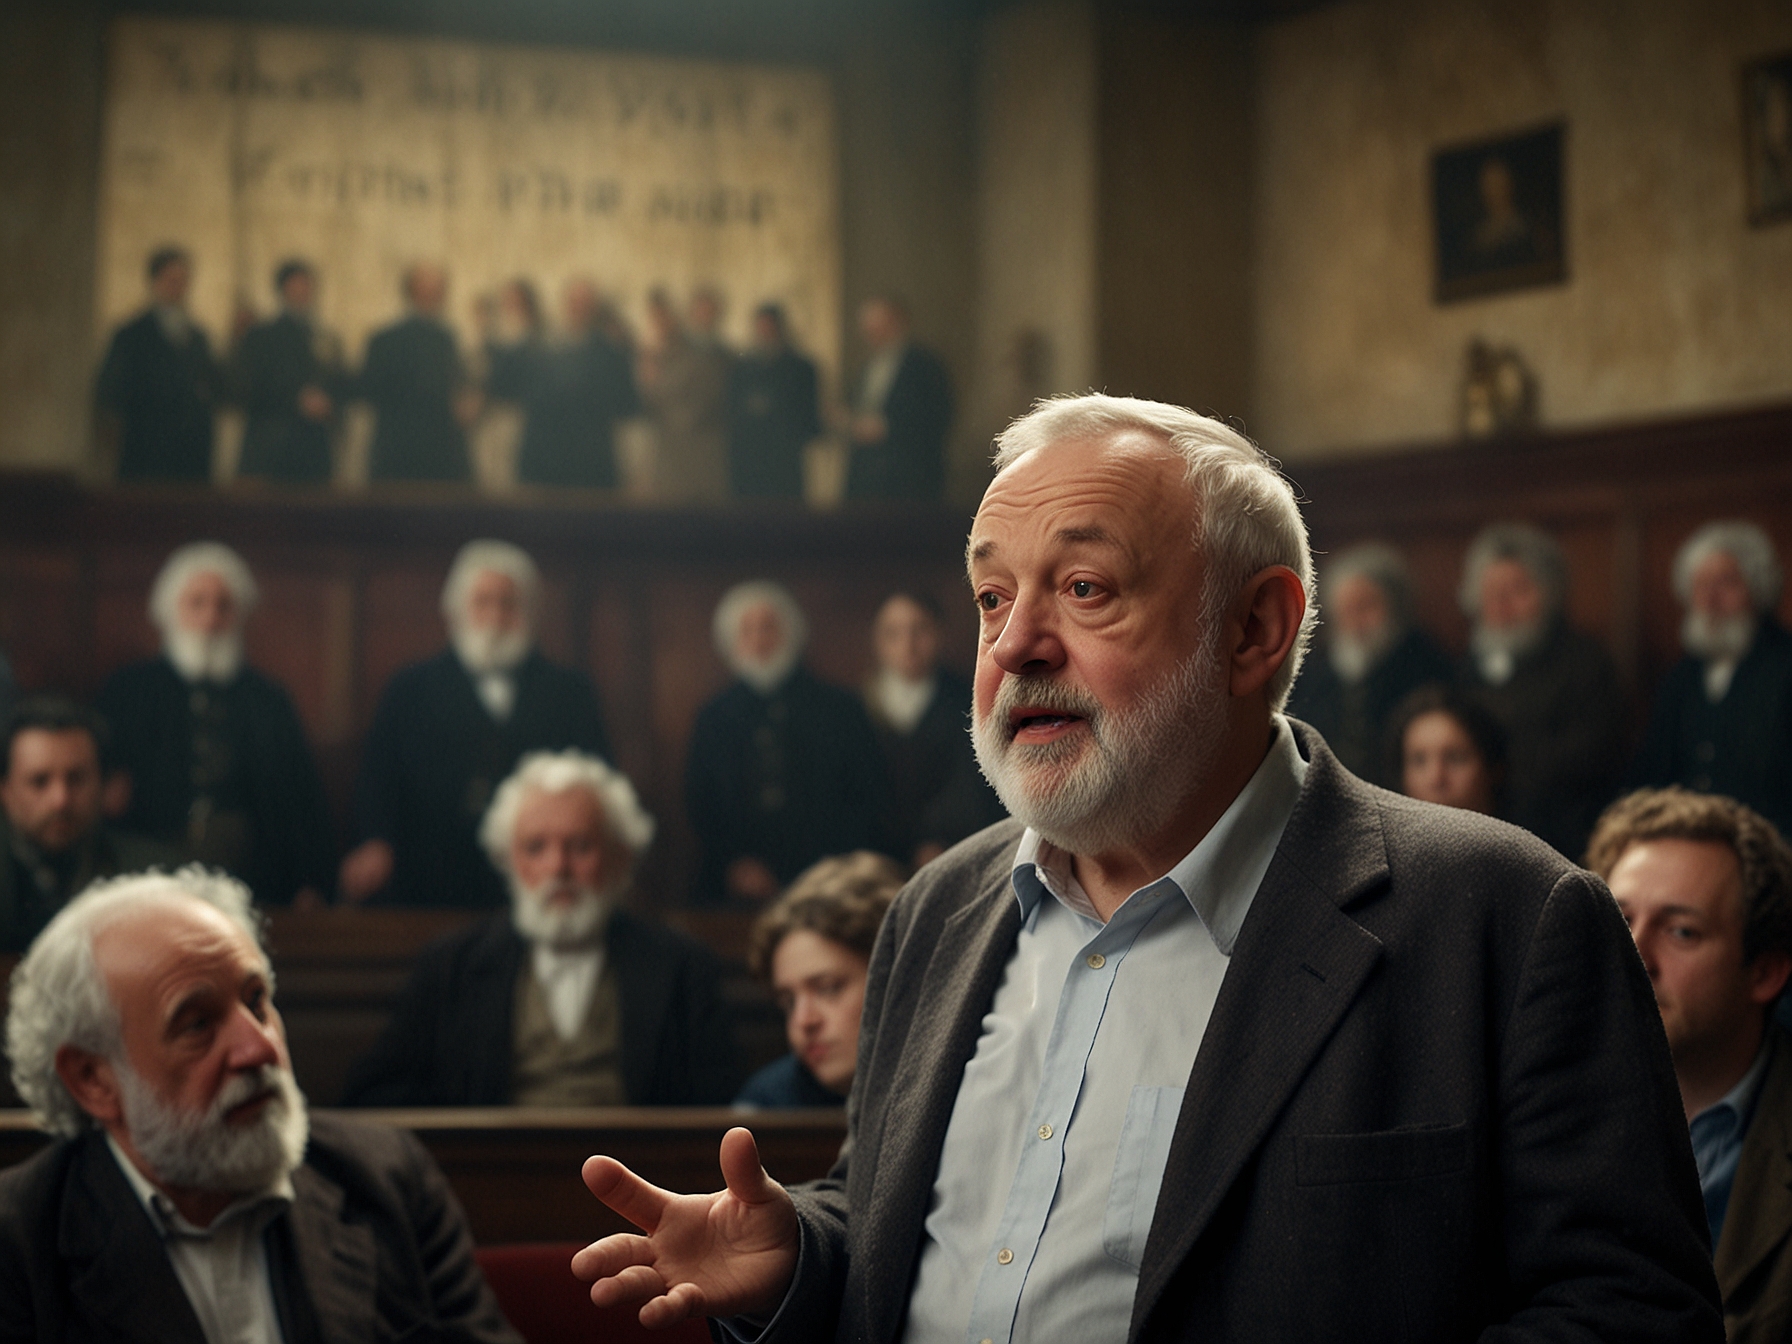 Mike Leigh passionately speaks at a film event, emphasizing the importance of voting and the production of contemporary films, while a backdrop showcases a scene from 'Peterloo'.